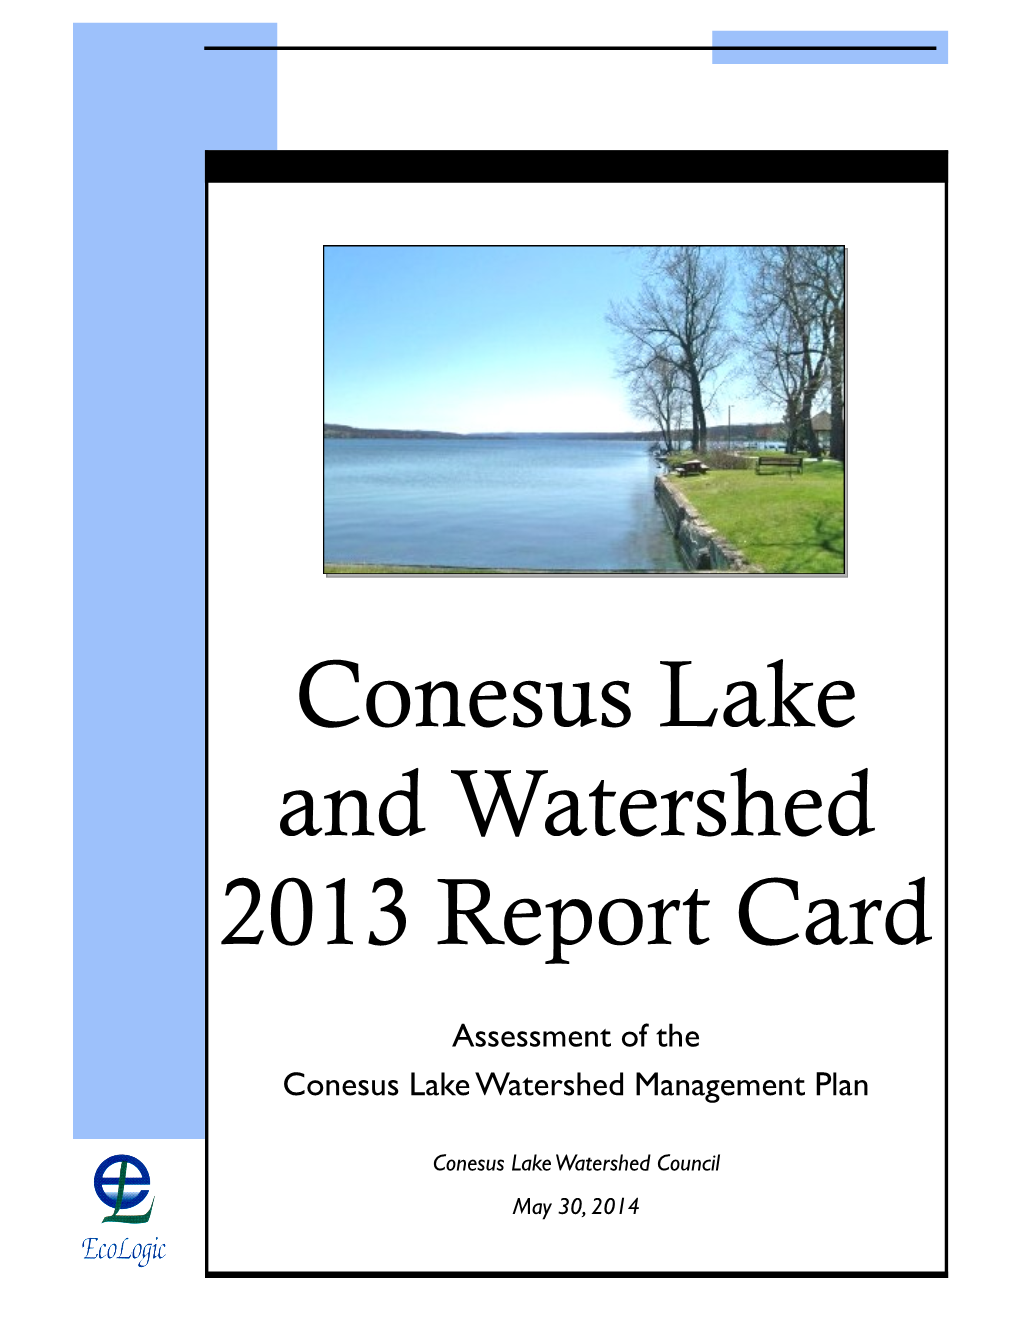 Conesus Lake and Watershed 2013 Report Card